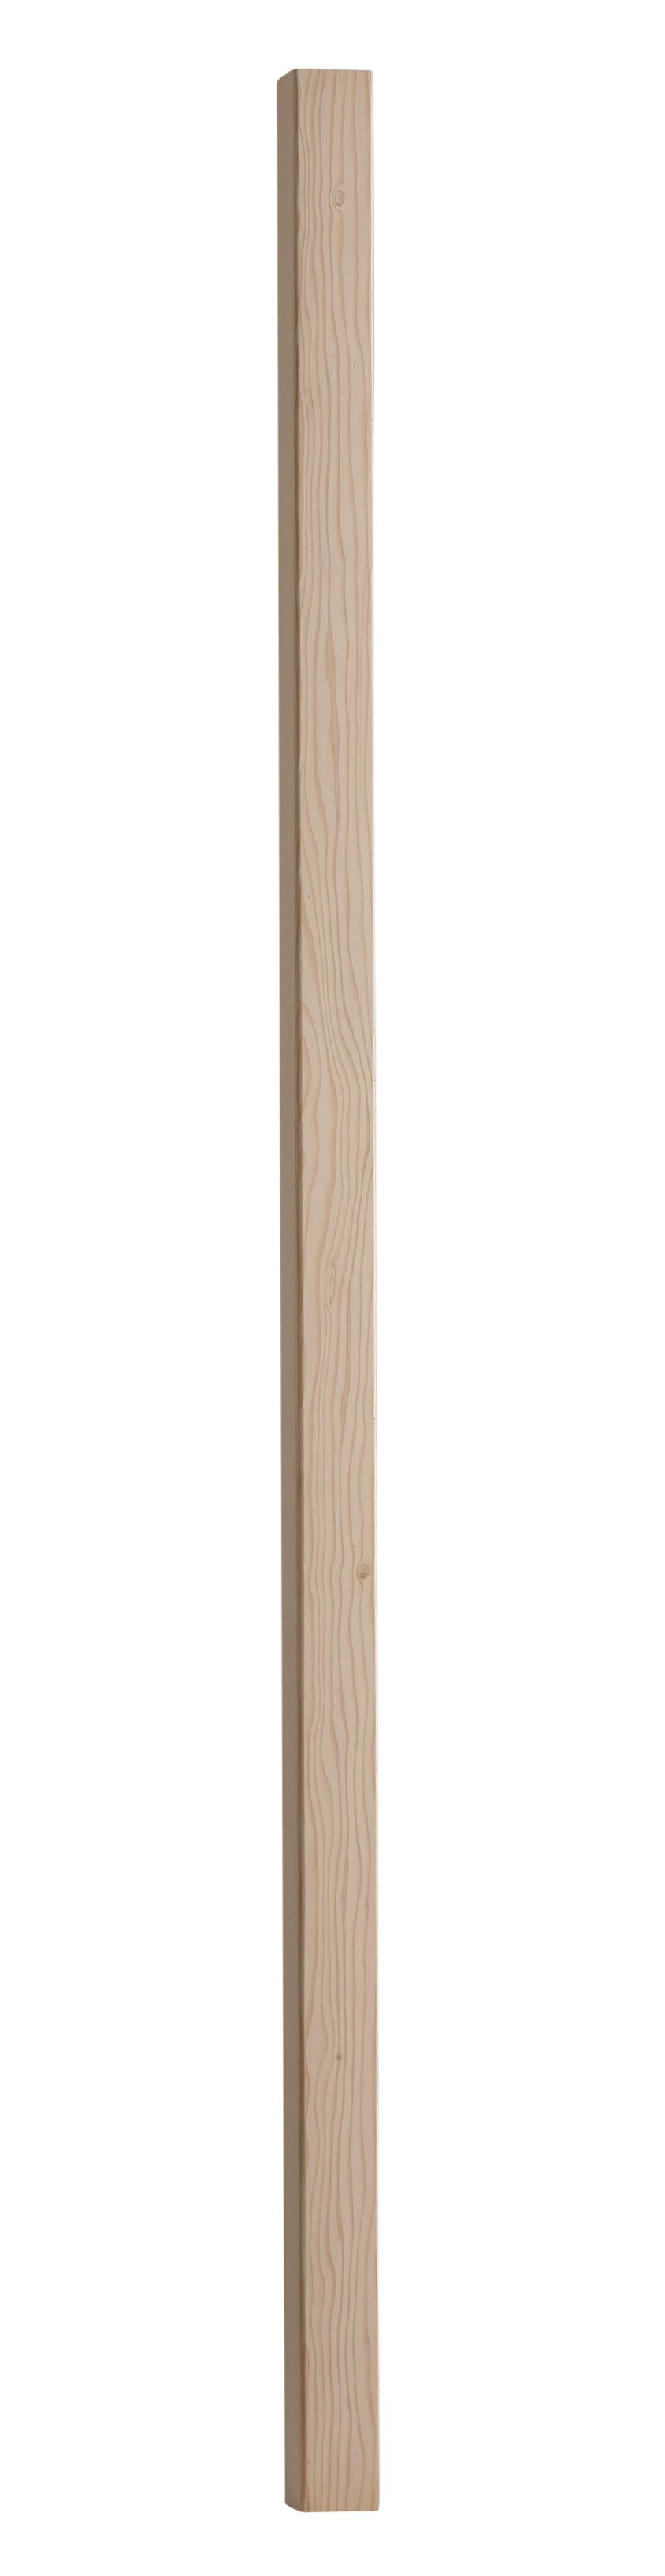 Image of Wickes Contemporary Hemlock Spindle 41 x 900mm